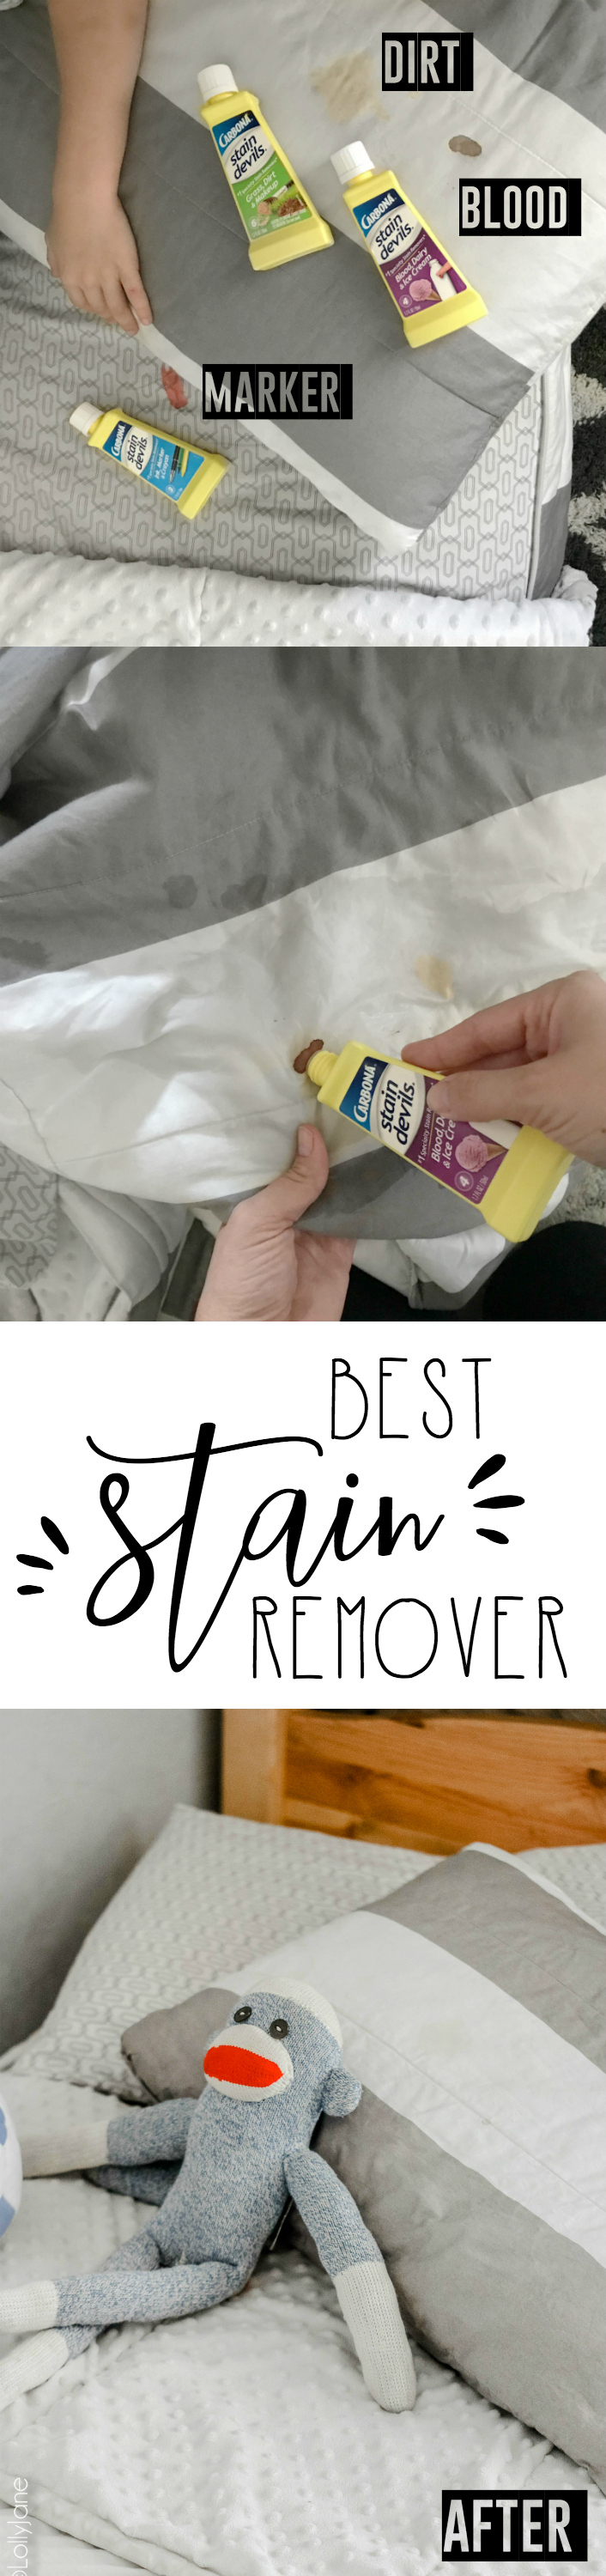 WOW! This stain remover got rid of dried blood, caked on dirt, and marker in just a few steps! Check out what other everyday stains it can remove! #stainremover #cleaningtips #momhacks #cleaning #cleaninghack #cleaningtricks #carbonara #cleaningtips